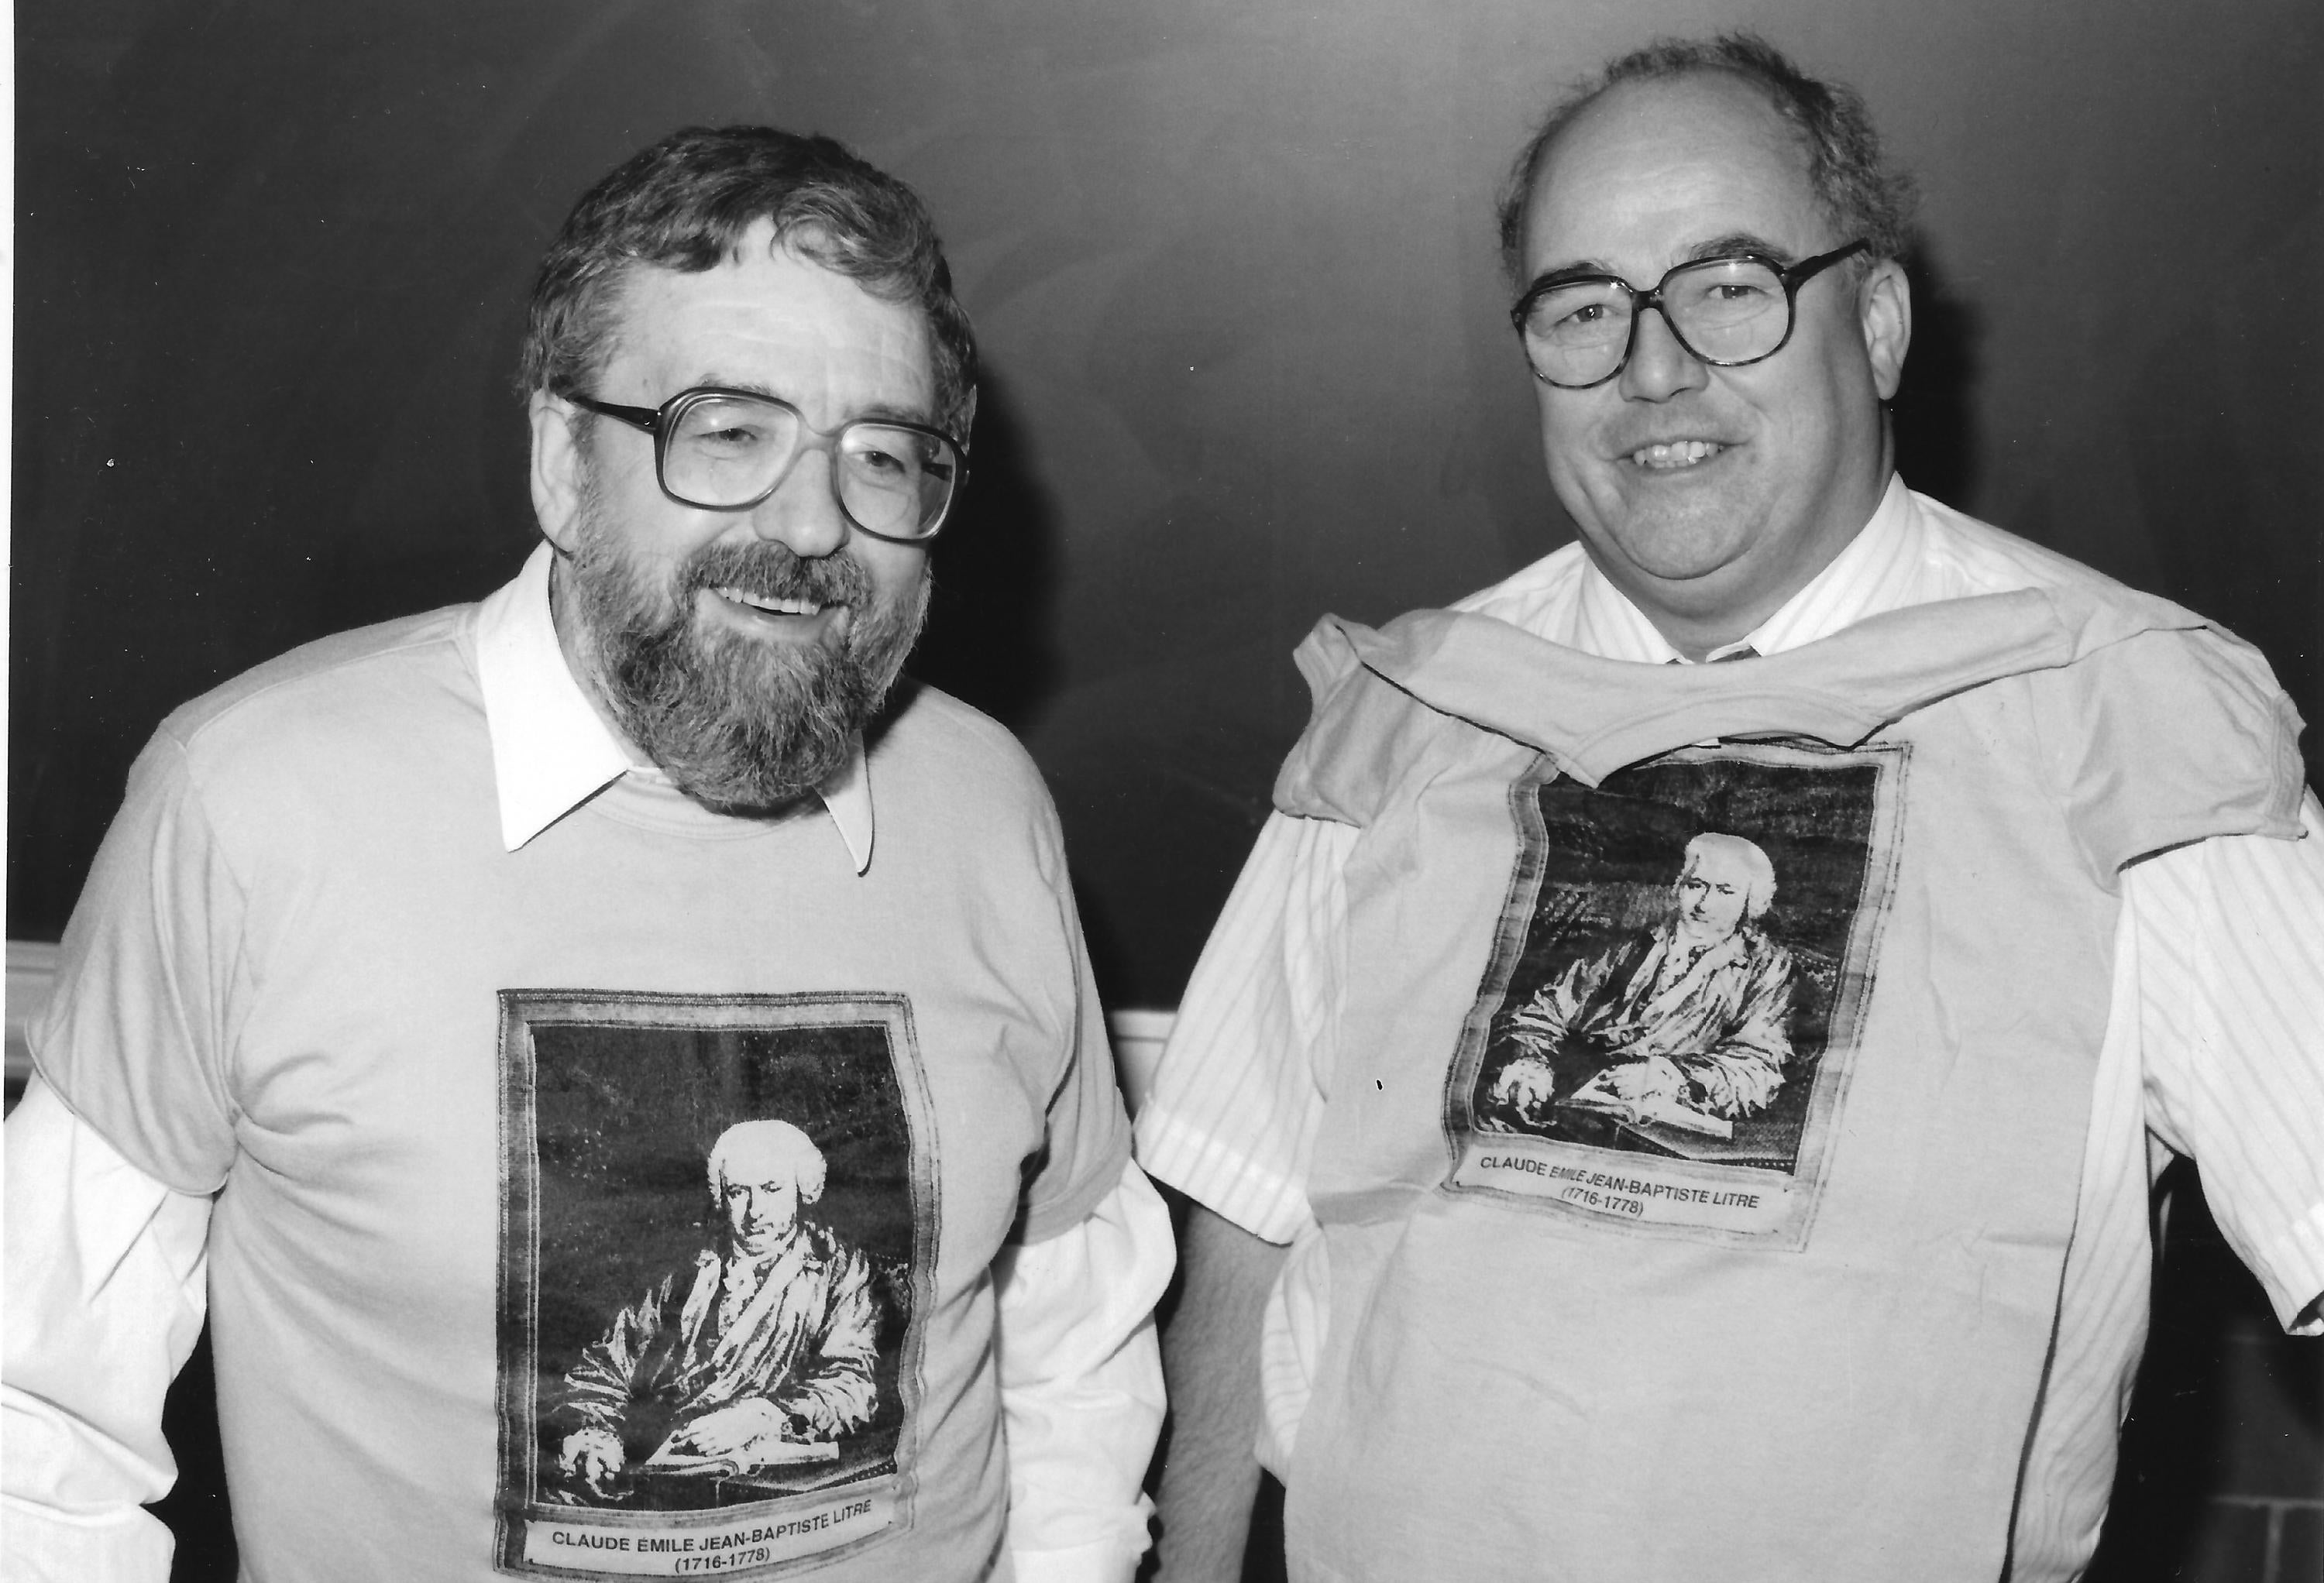 1989 photo of Ken Woolner and Reg Friesen each in T-shirt with a photo of fictional Litre